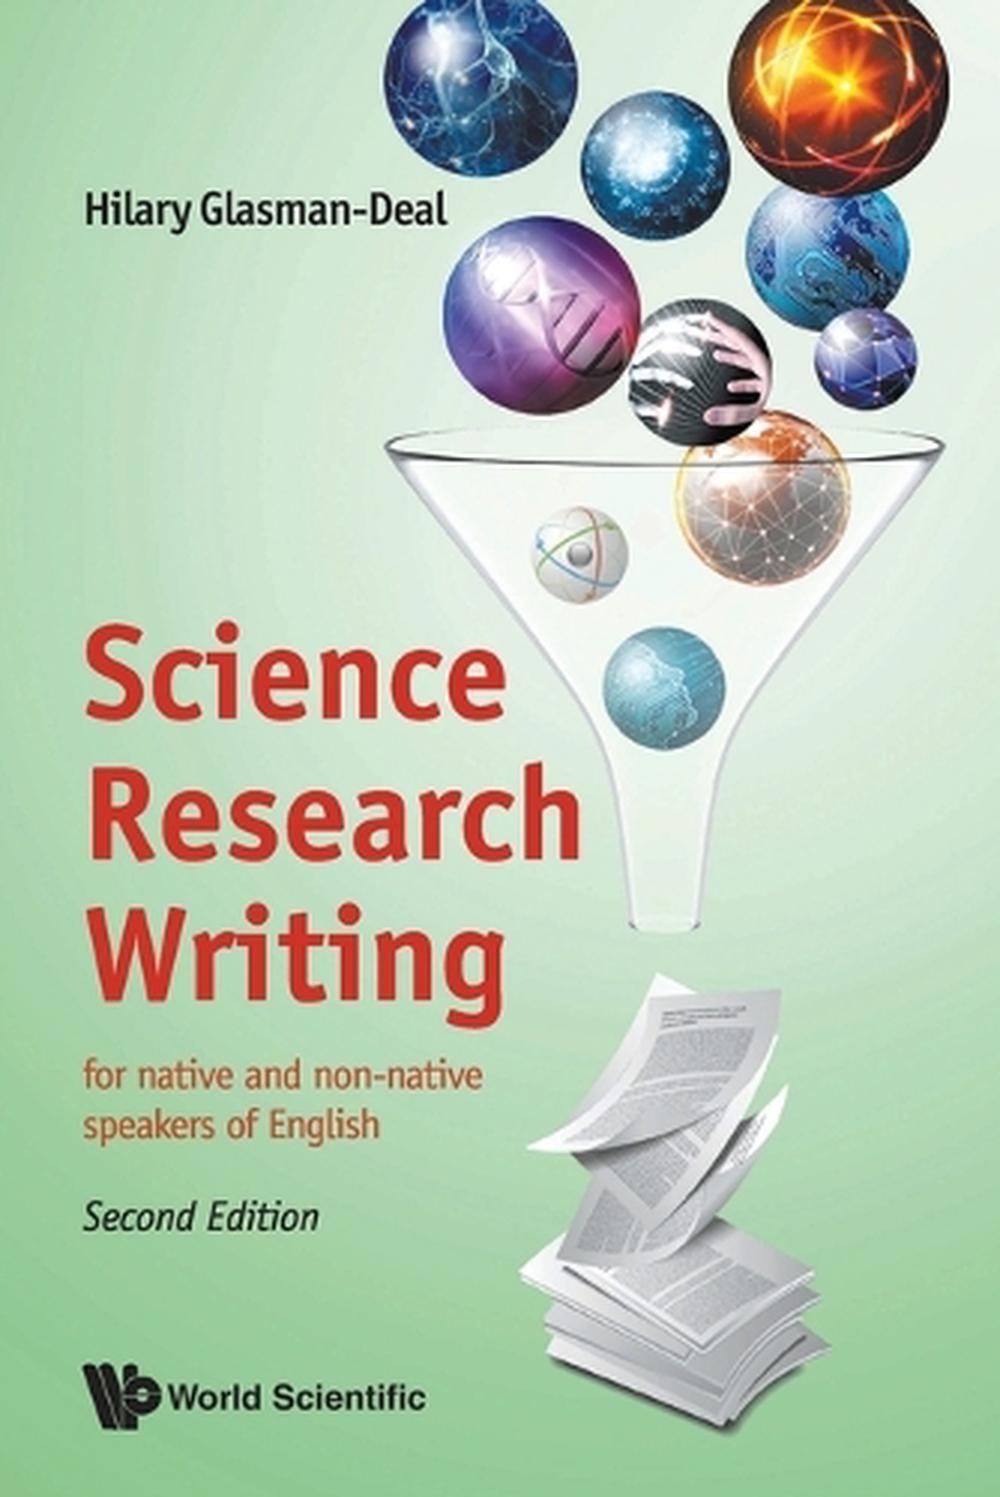 science research writing hilary glasman deal pdf